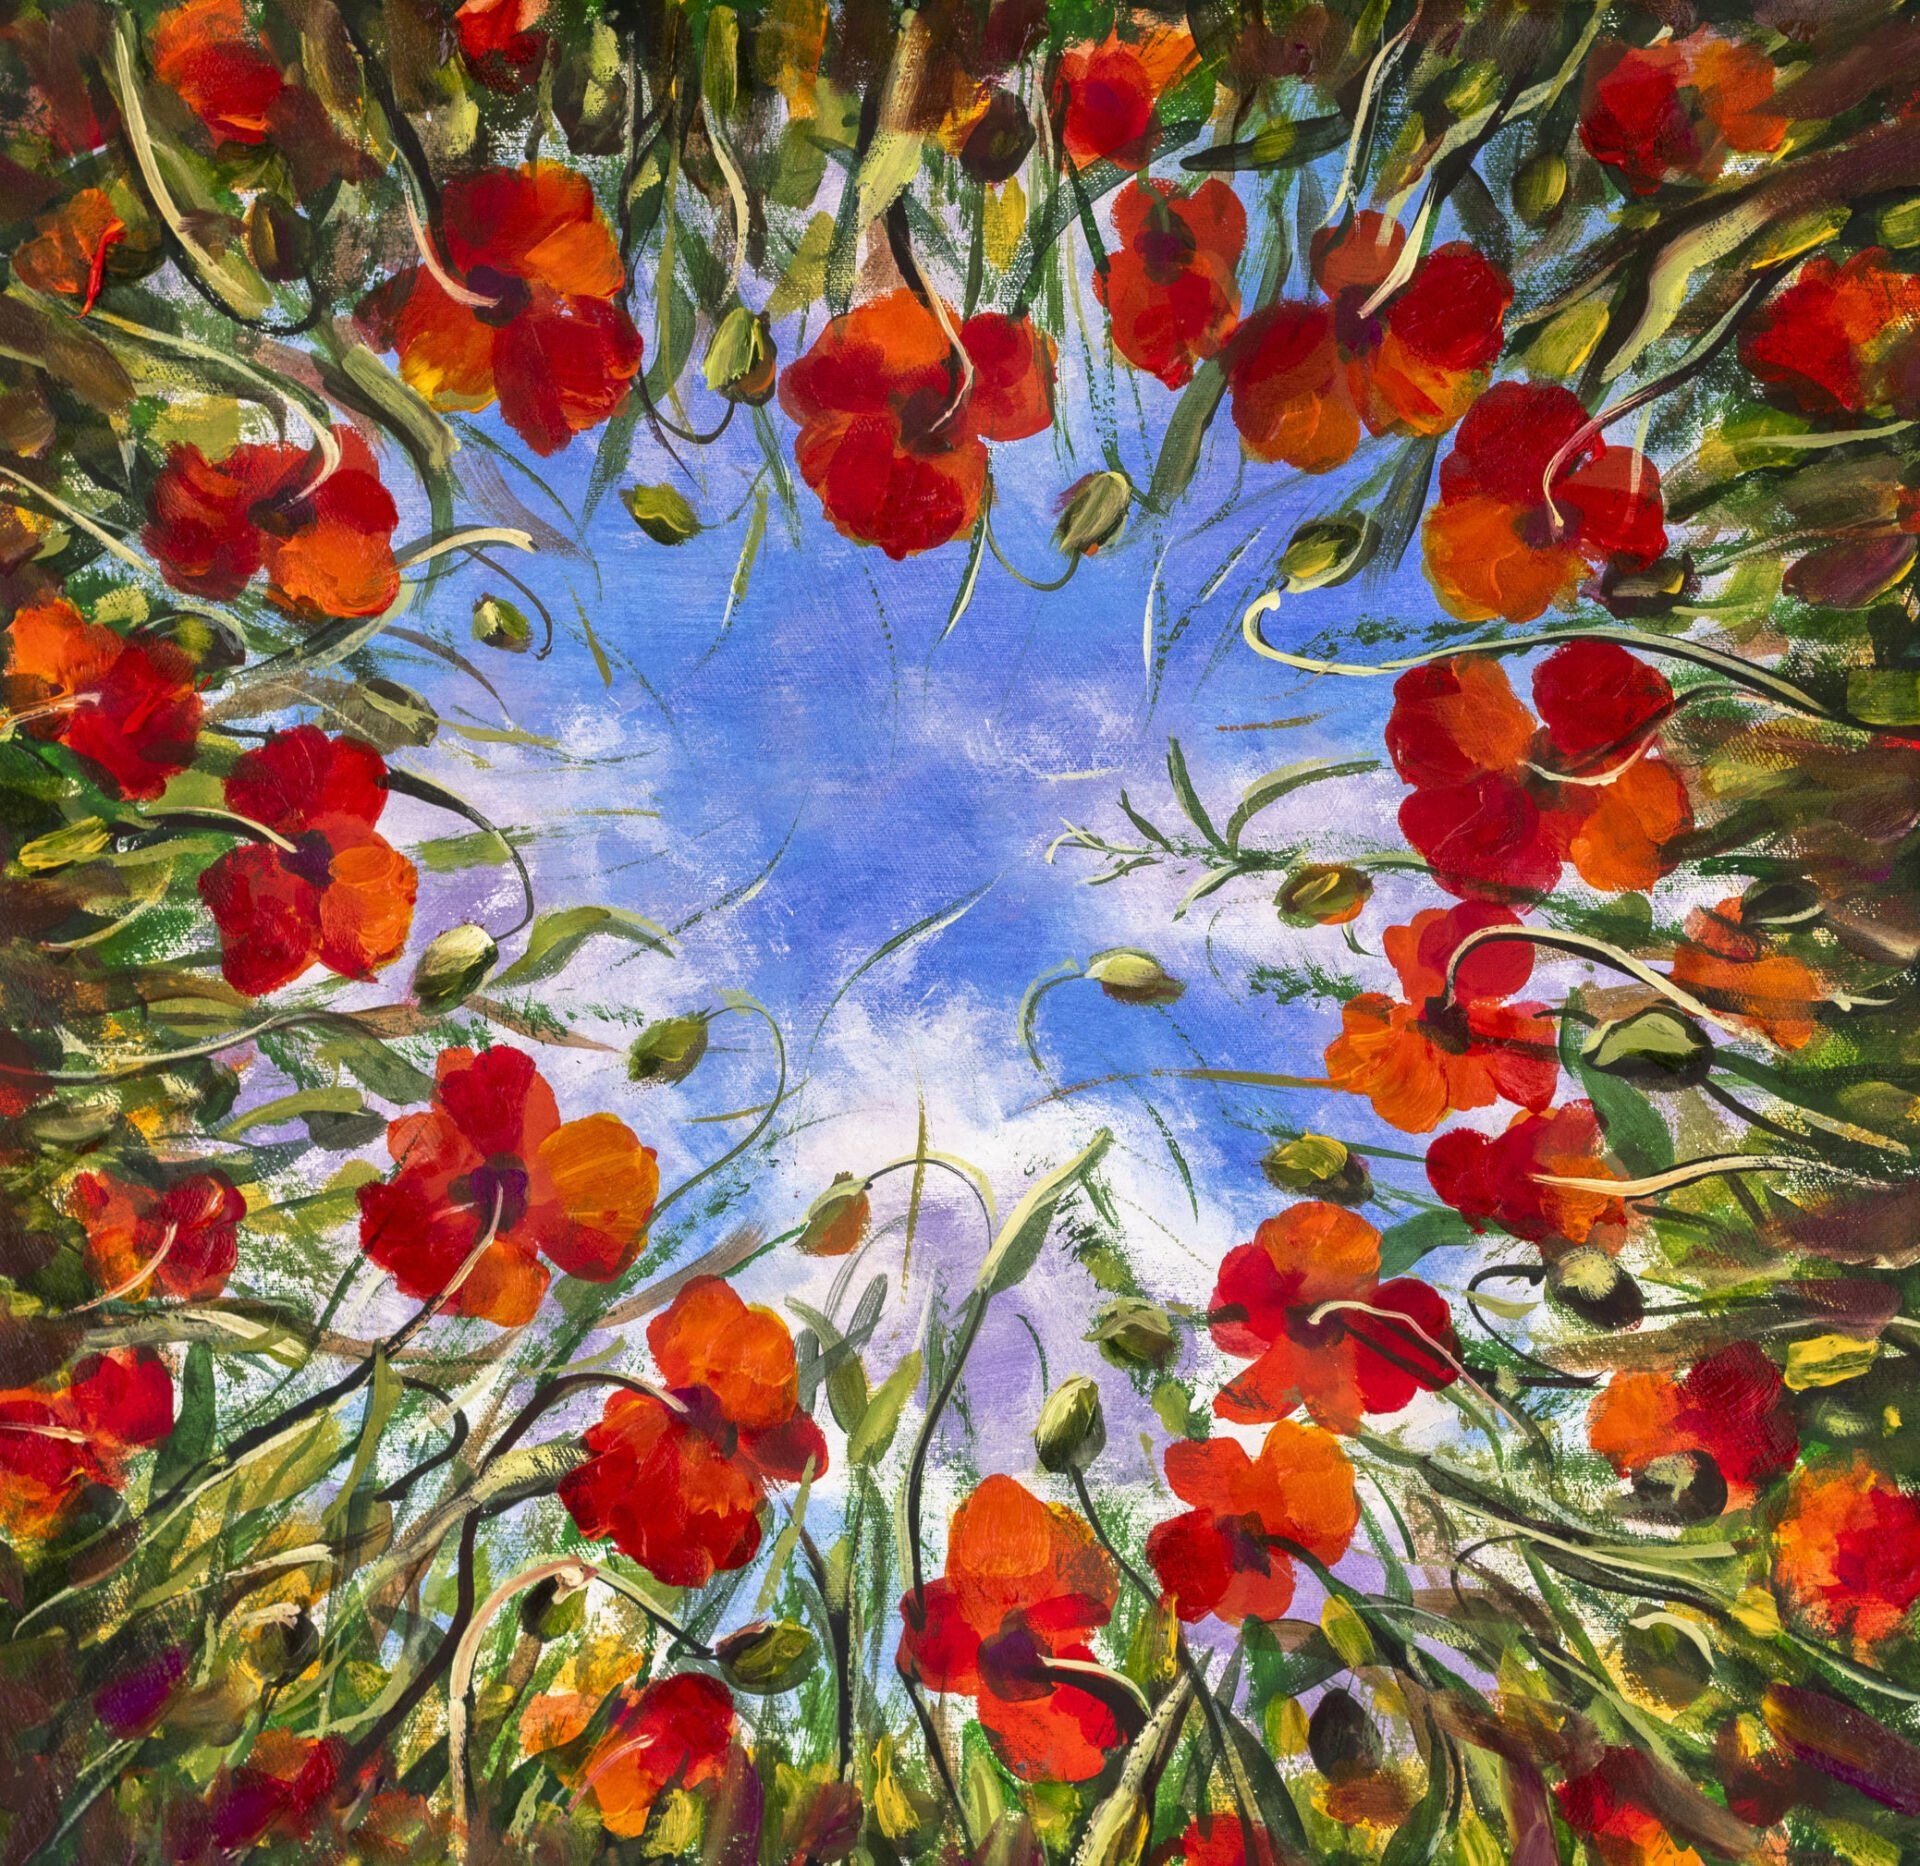 Looking up at the sky through a heart shaped ring of growing poppies